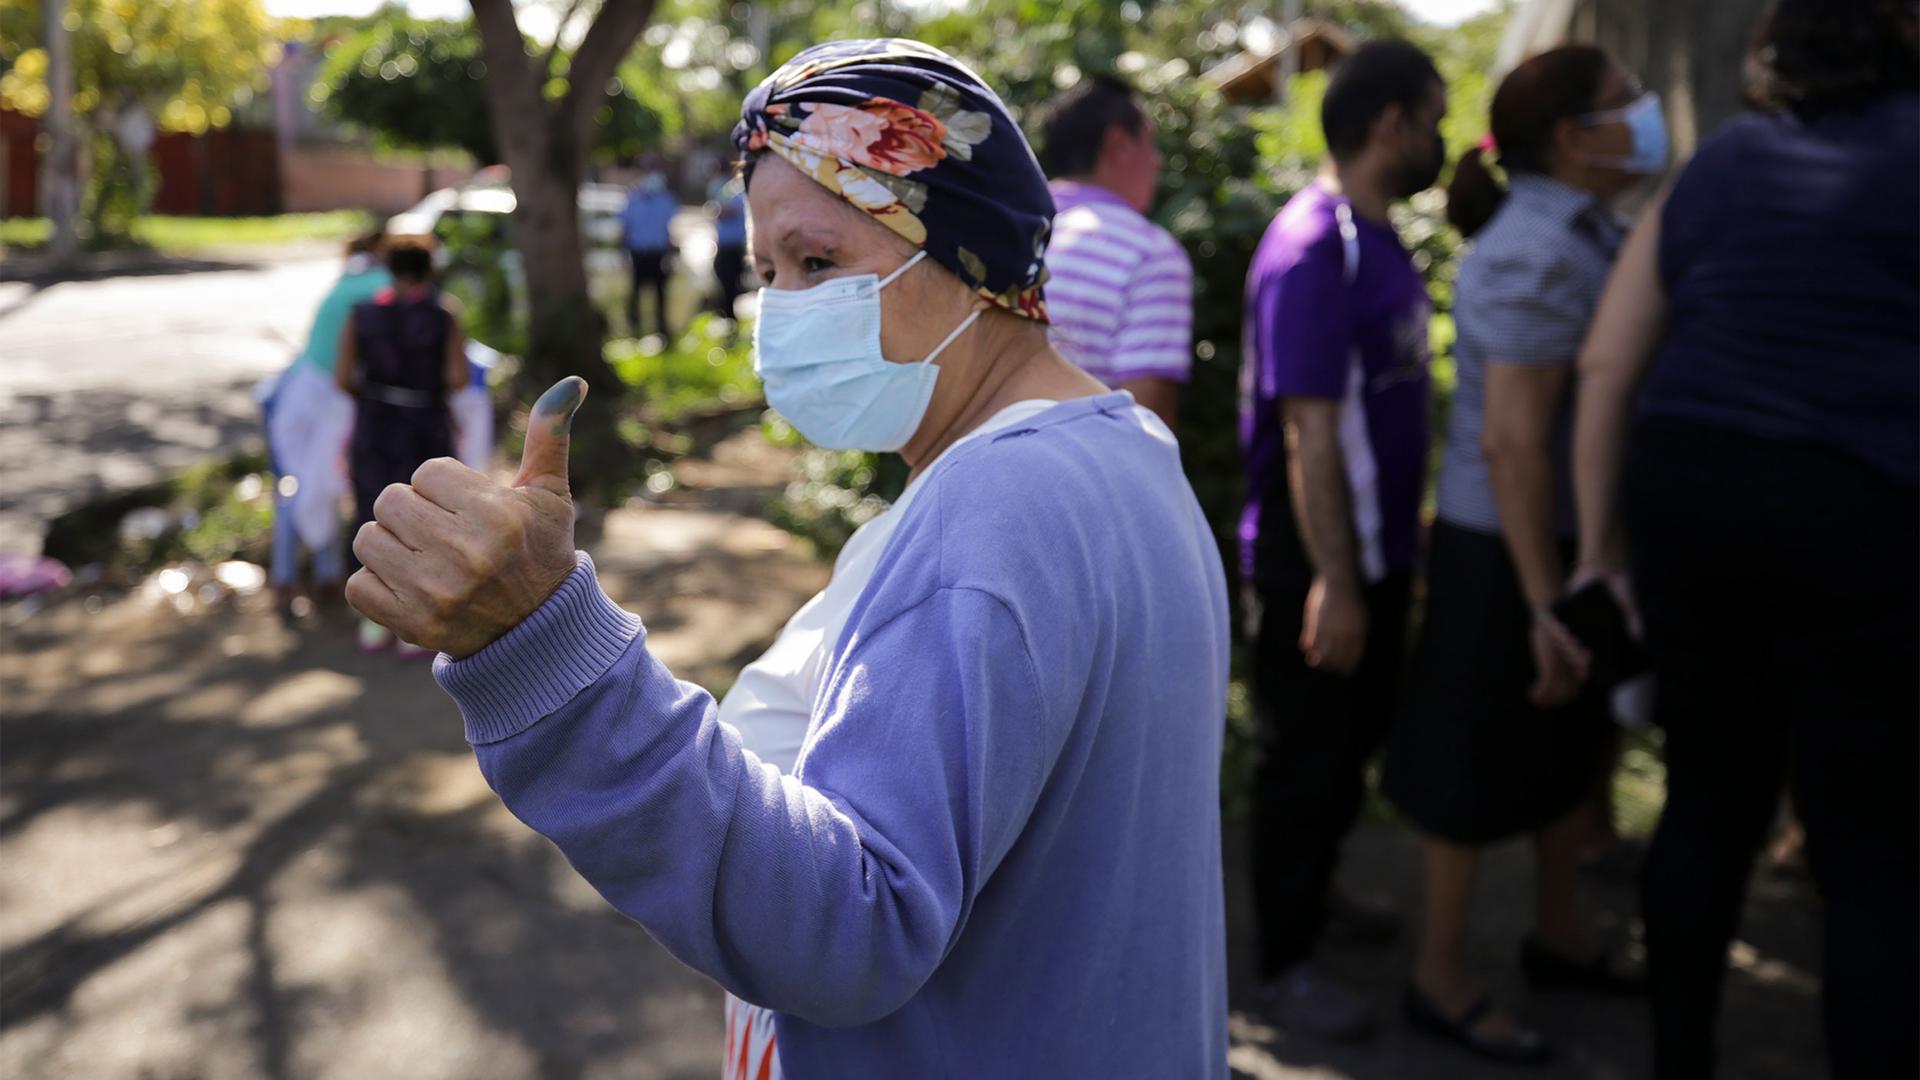 A woman shows her ink-stained finger after casting her vote during general elections in Managua, Nicaragua